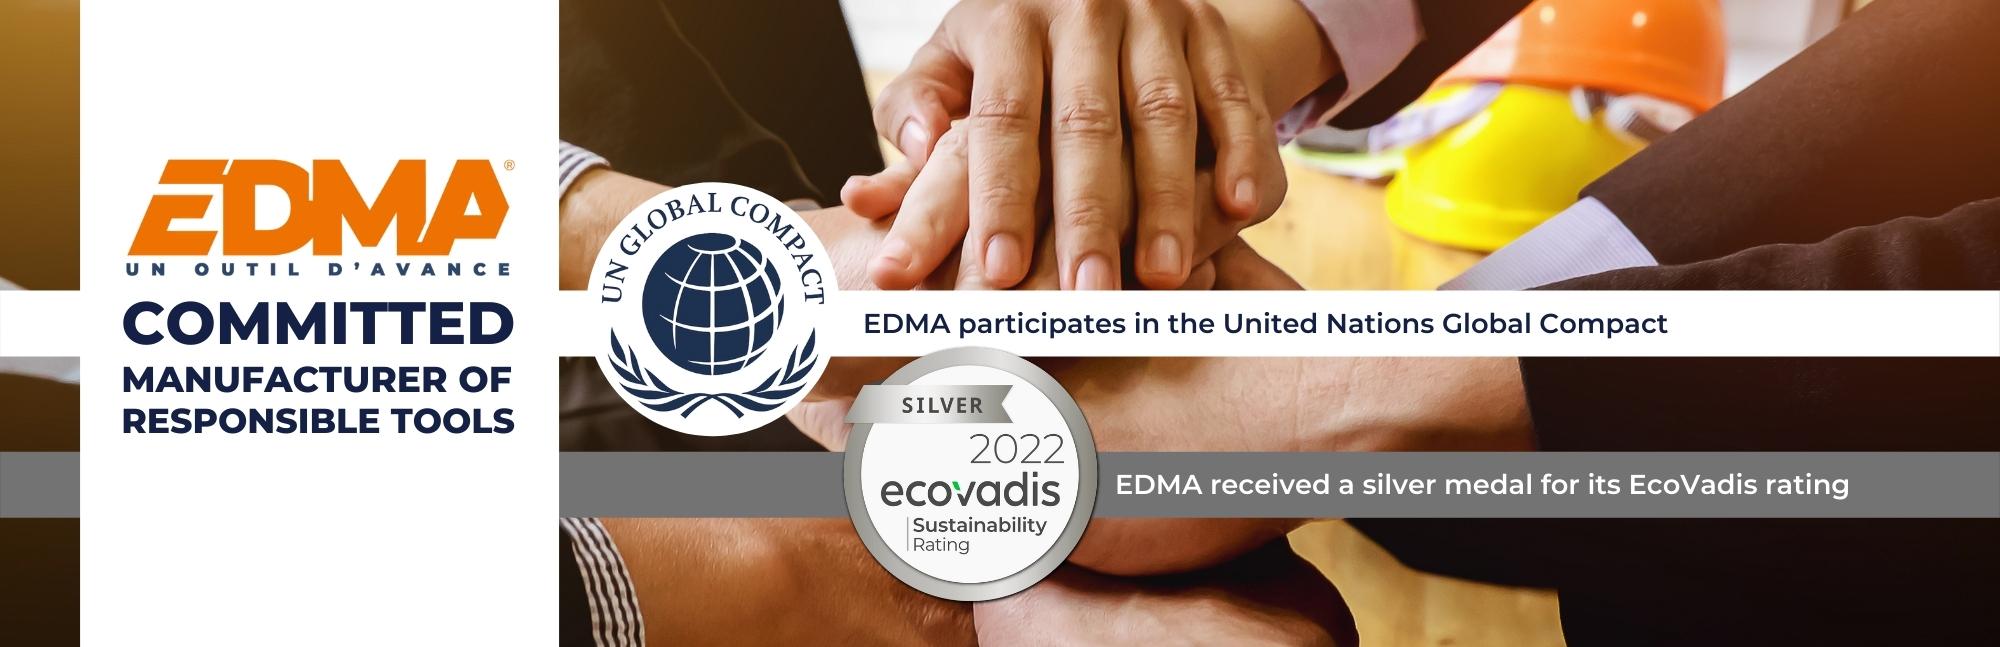 EDMA, committed manufacturer of responsible tools